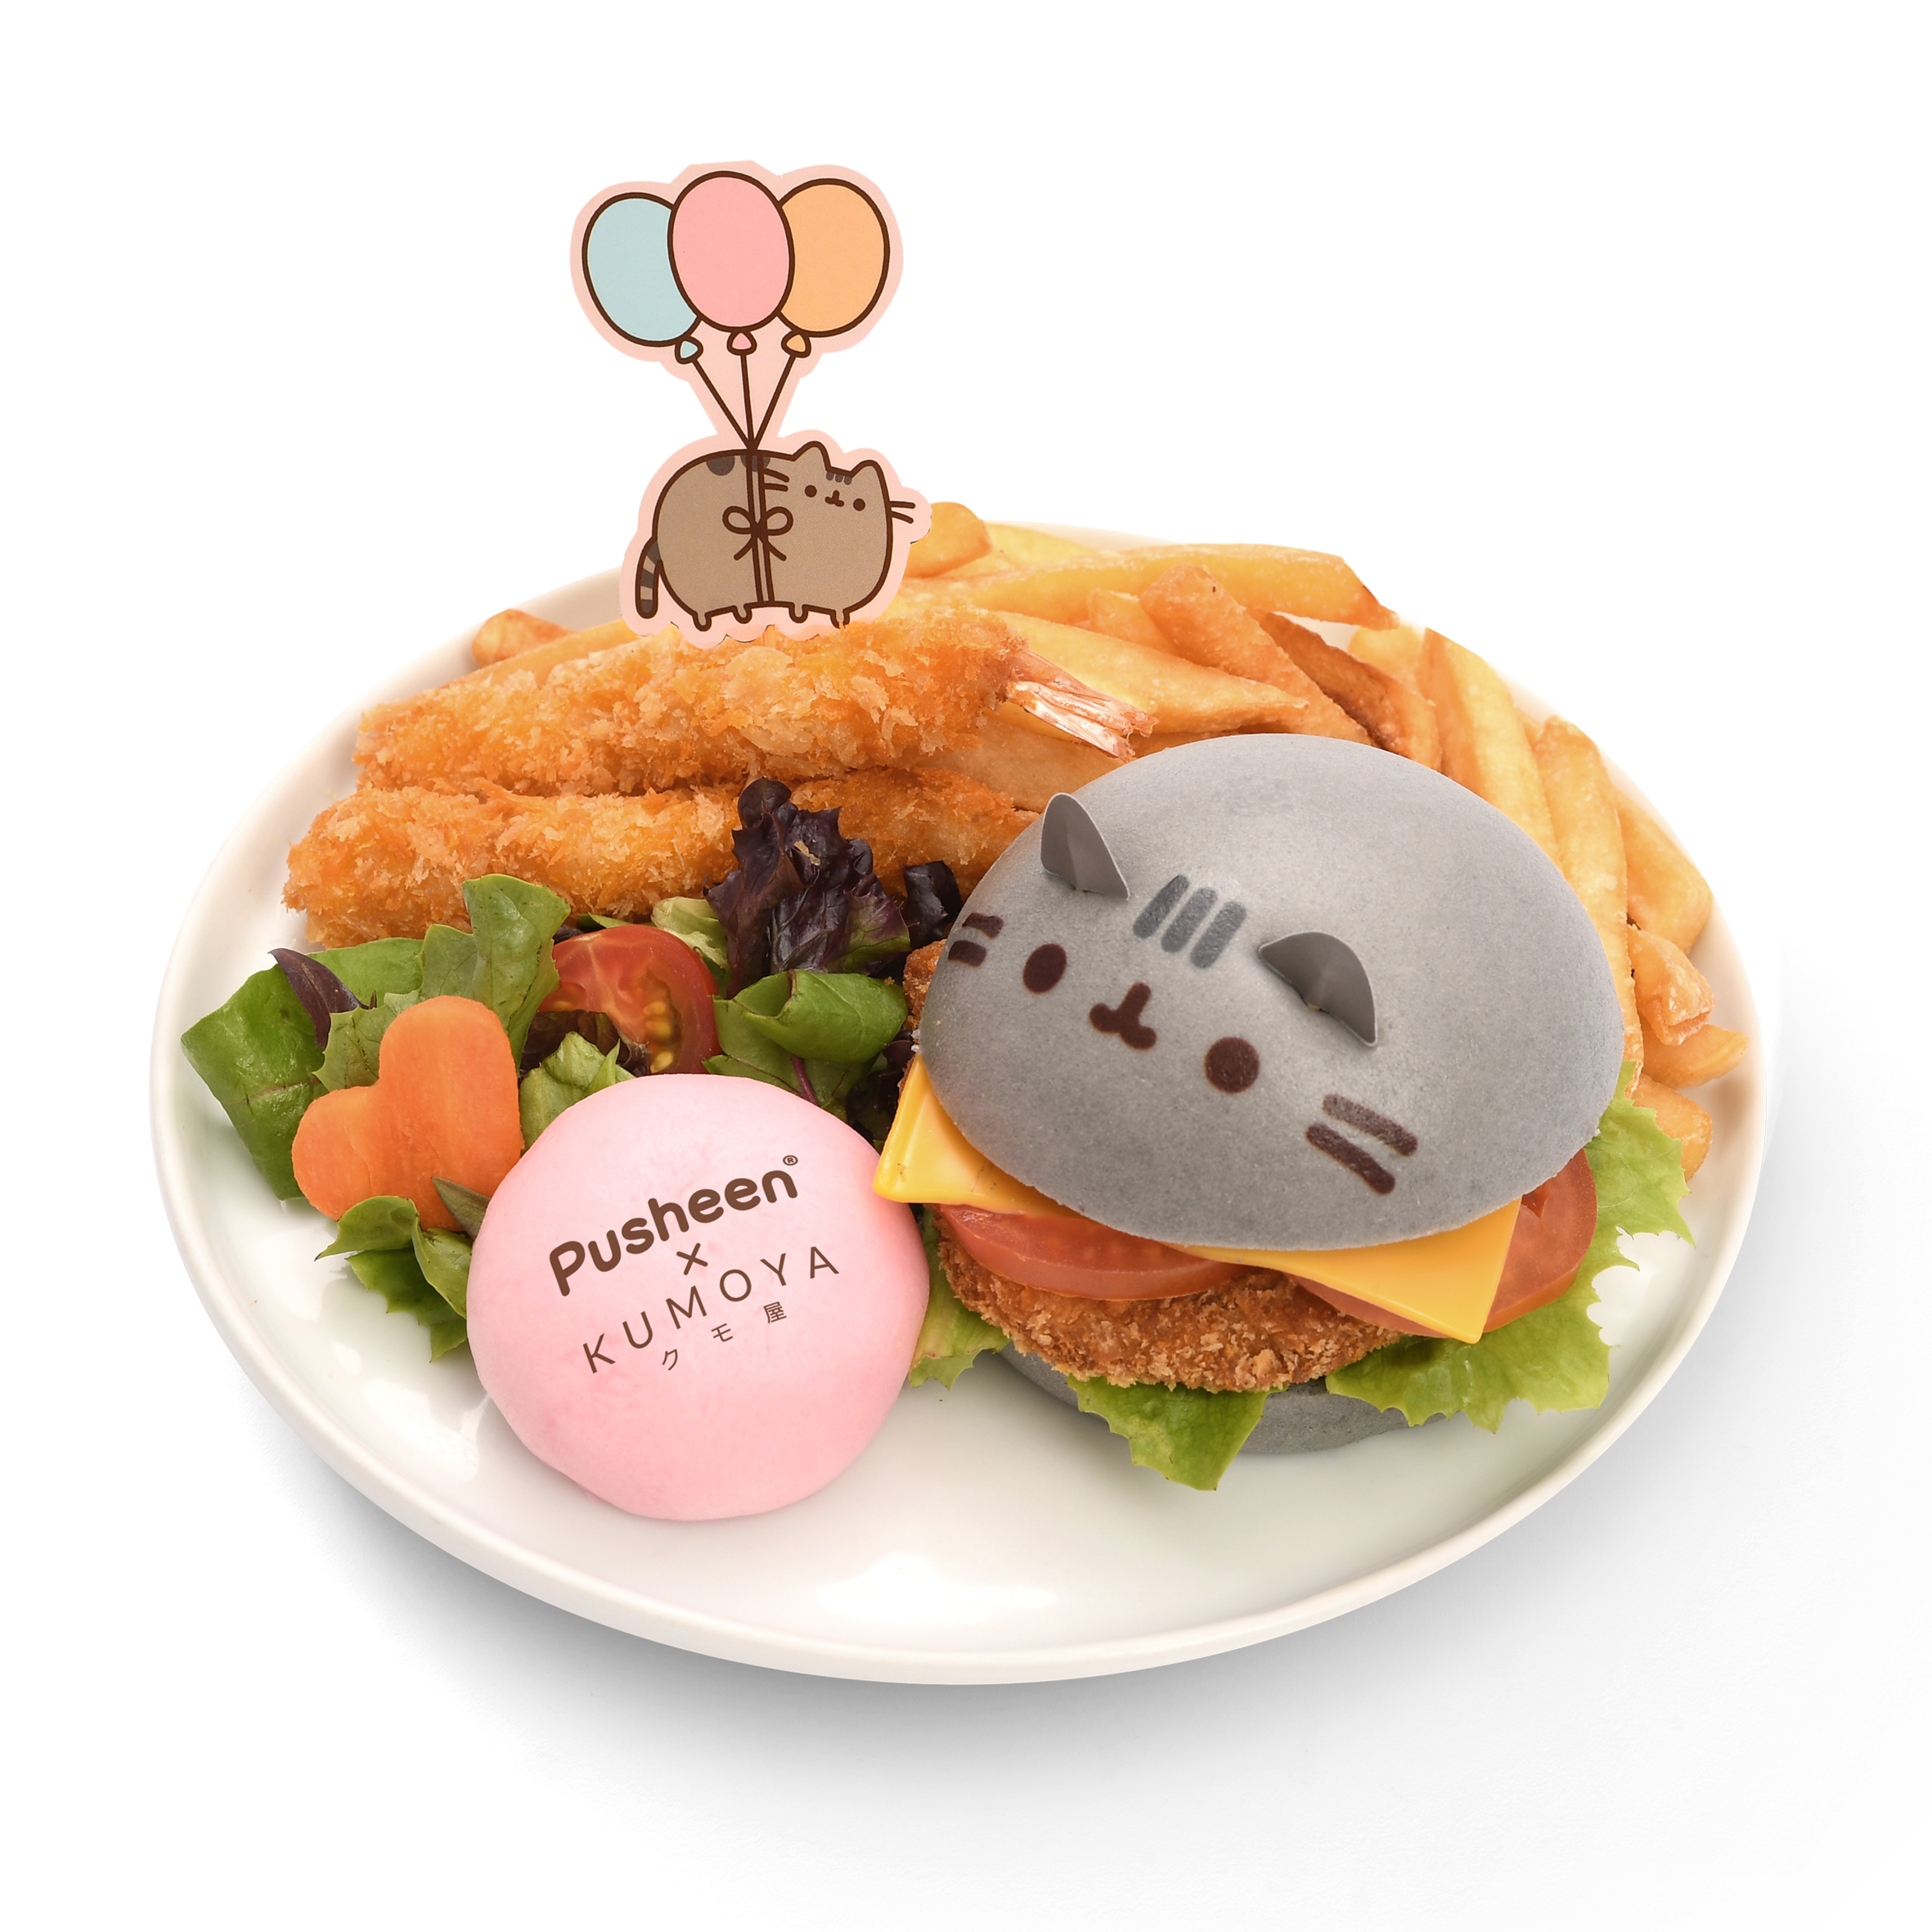  Pusheen  pop up cafe  in S pore from Jan 6 Mar 2021 